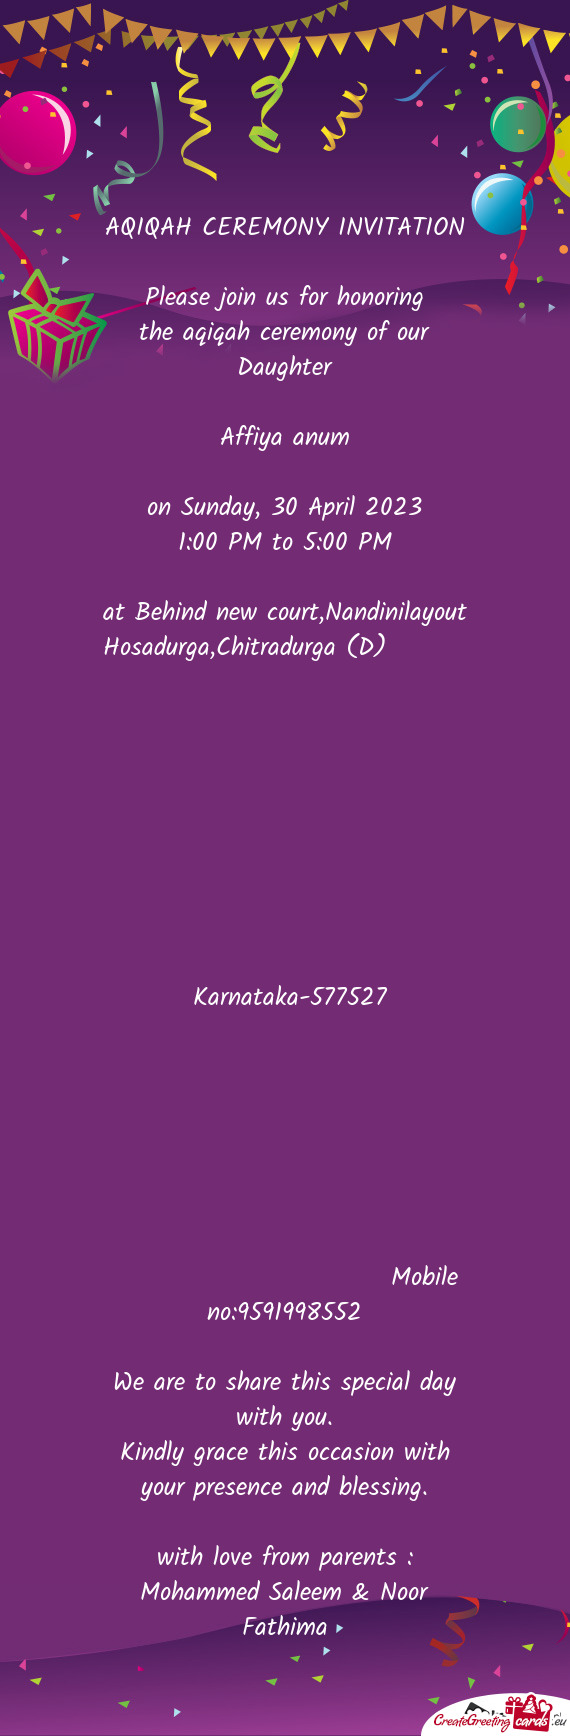 At Behind new court,Nandinilayout